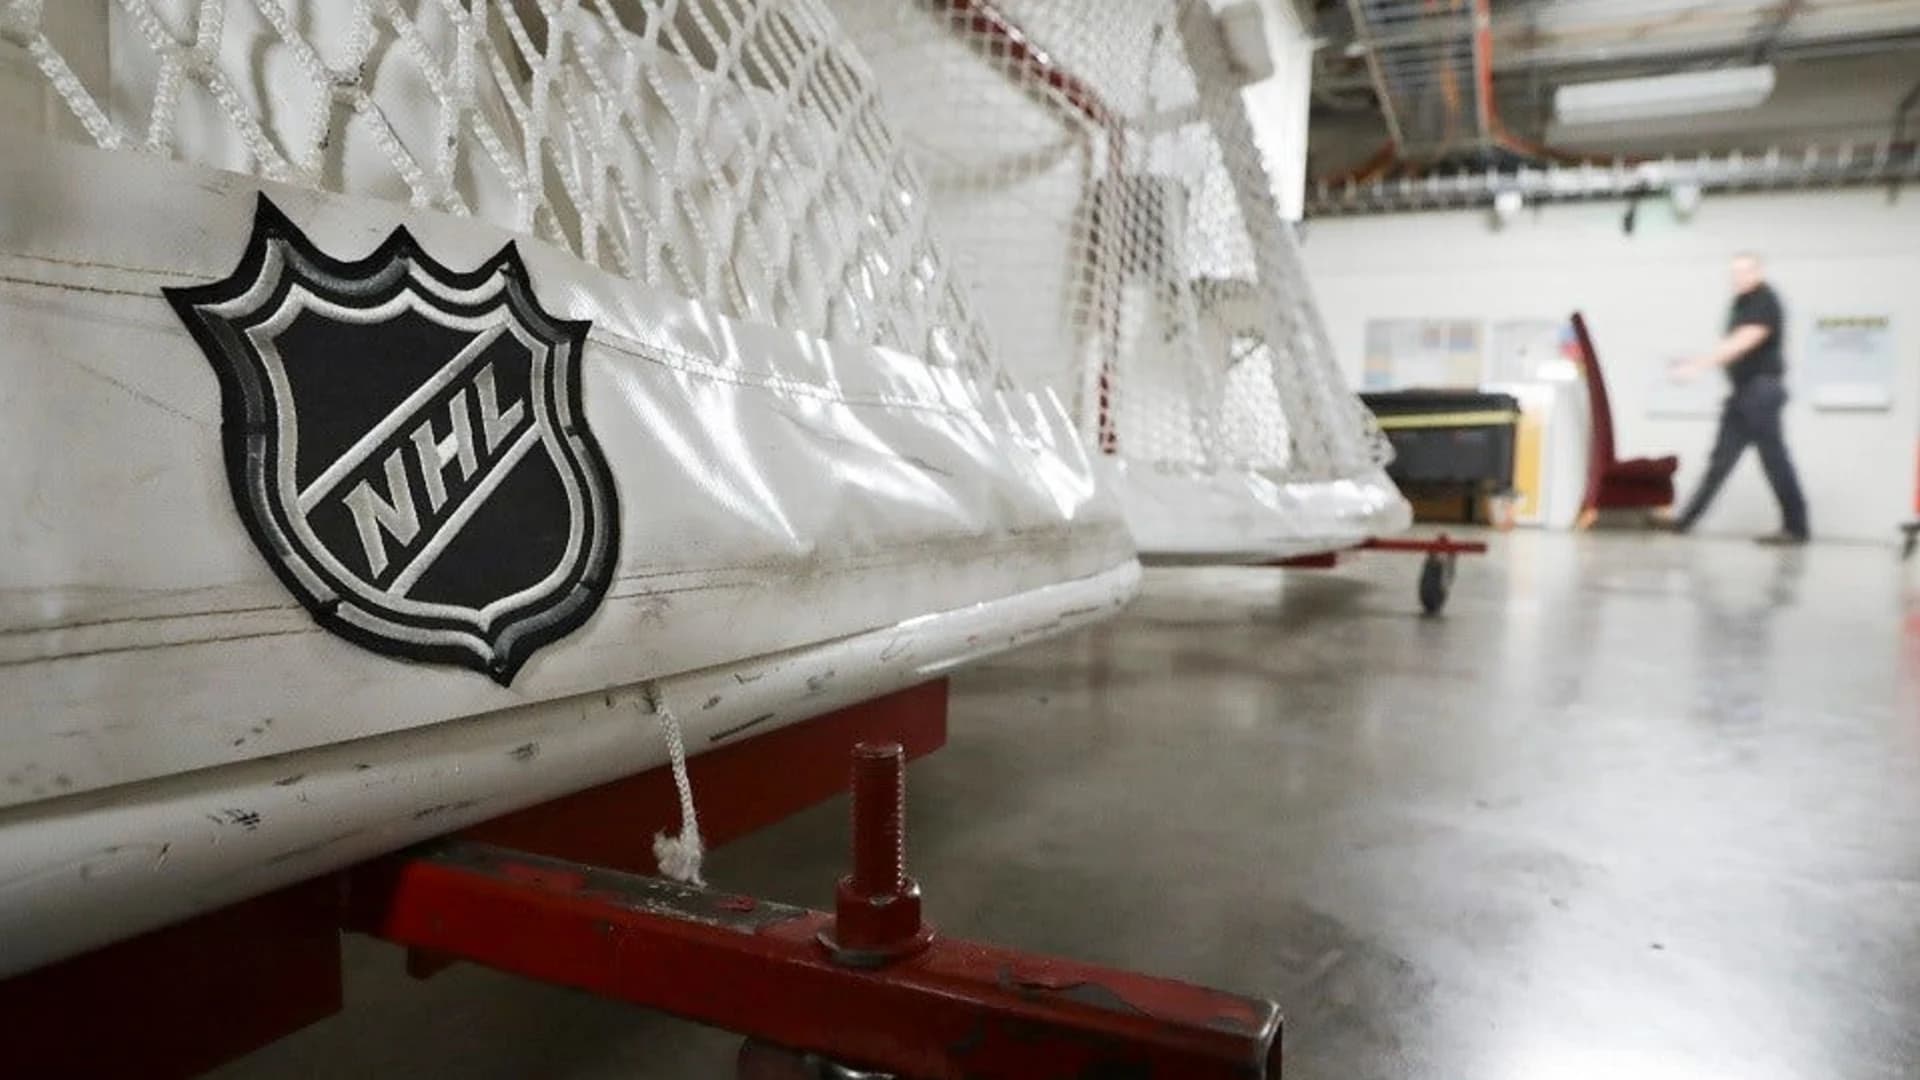 NHL, union announce plan to resume play on Aug. 1